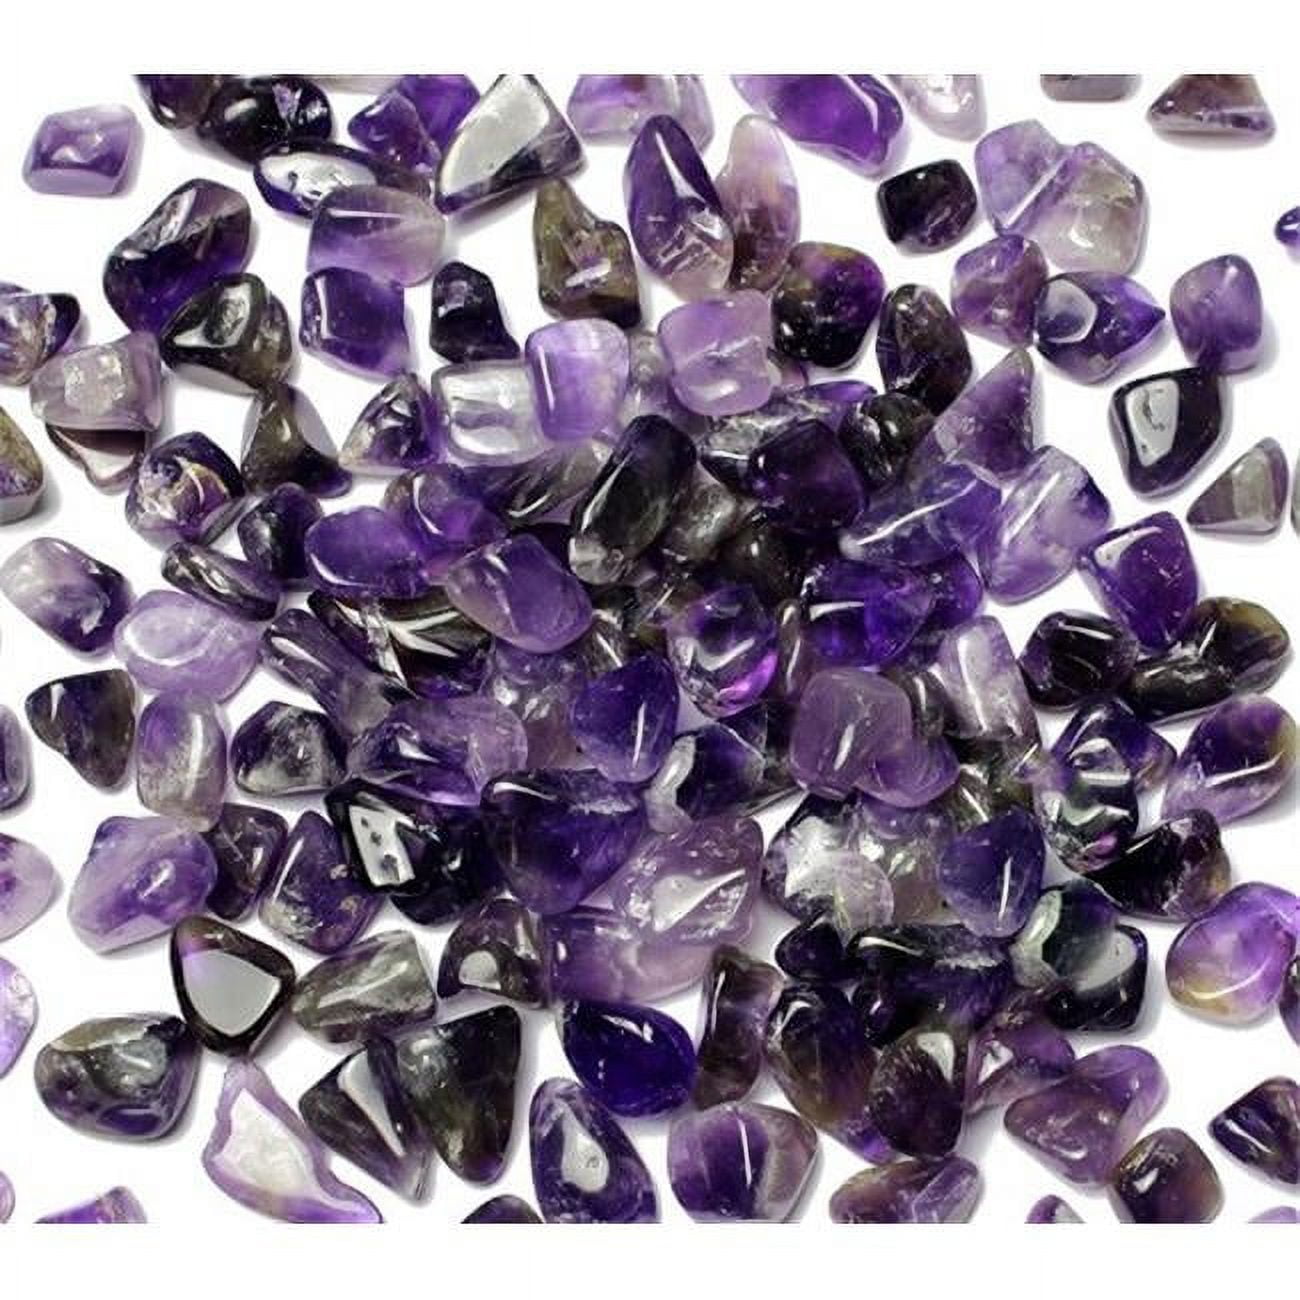 Rk460ame 1 Lbs Amethyst Tumbled Chips Stone